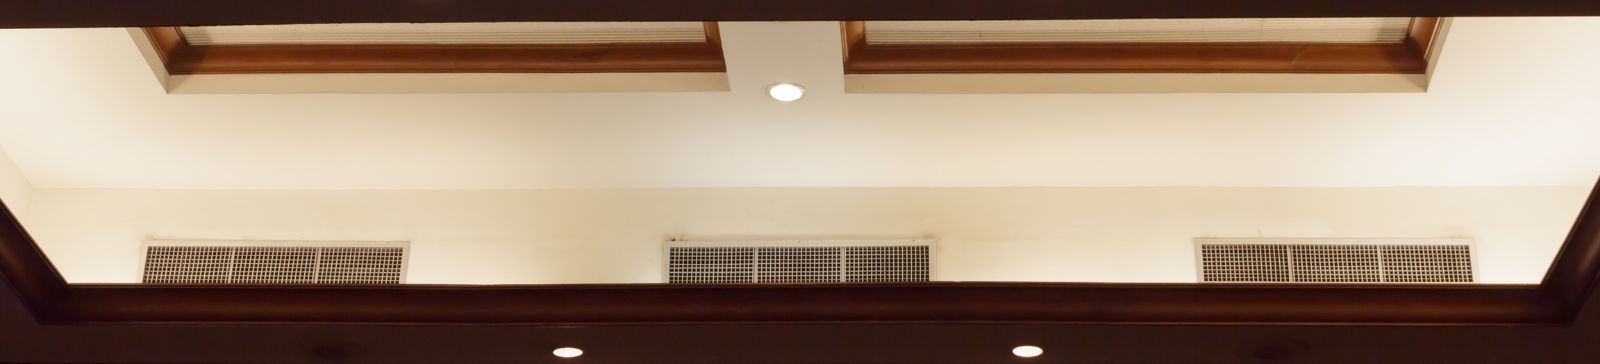 A view on a ceiling with HVAC system